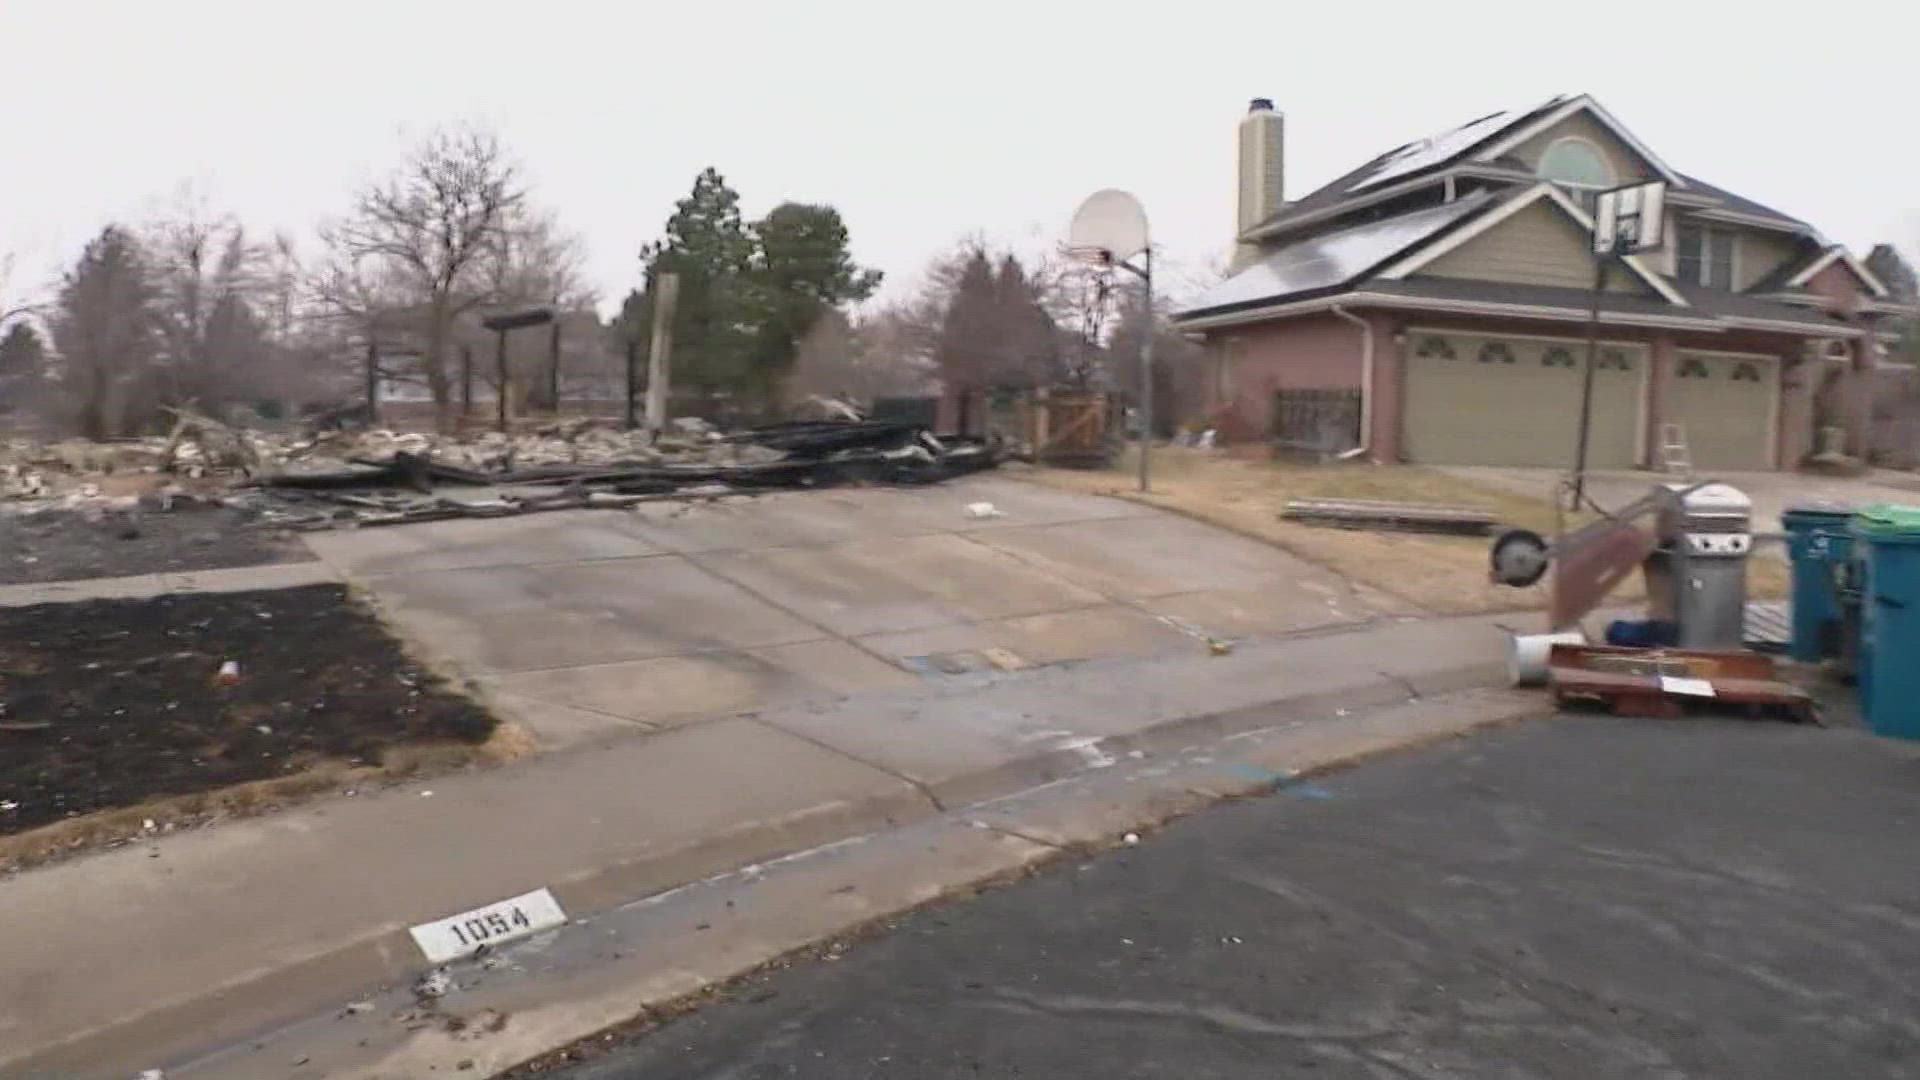 Anastaysia Bolton was in a Colorado neighborhood to see the damage done by the tragic fire.